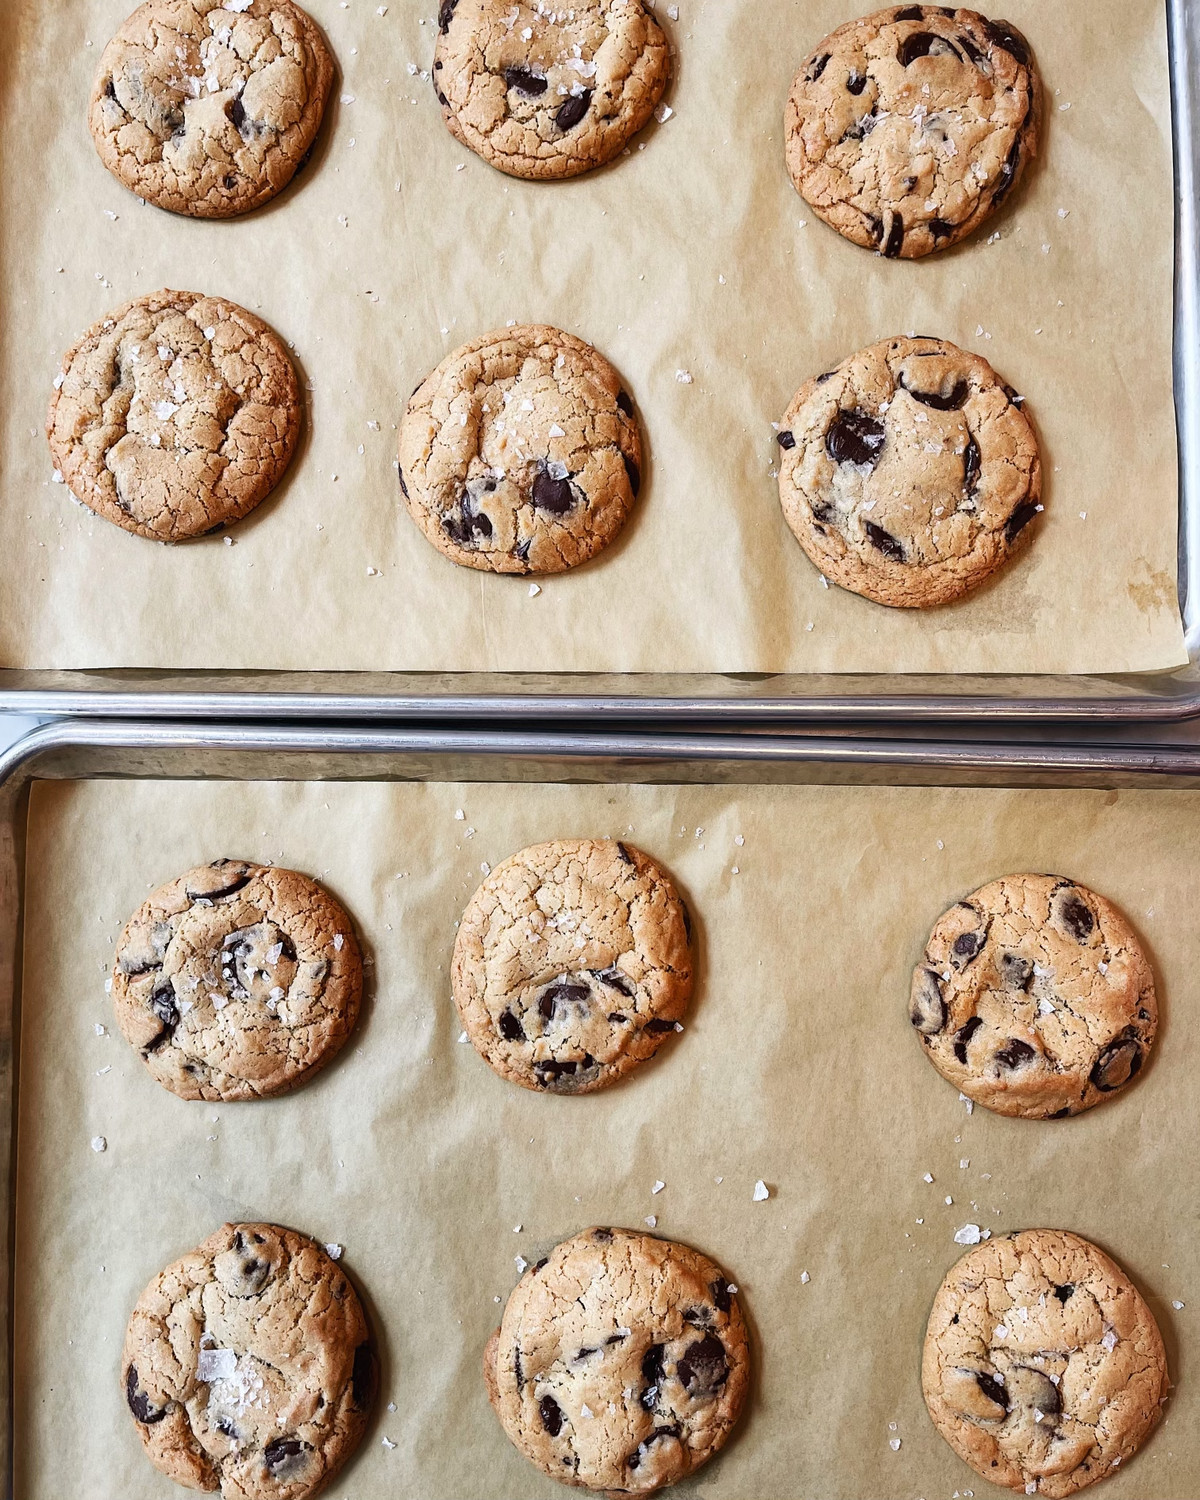 A dozen chocolate chip cookies on 2 baking sheets with parchment paper underneath and flakes of salt scattered across.